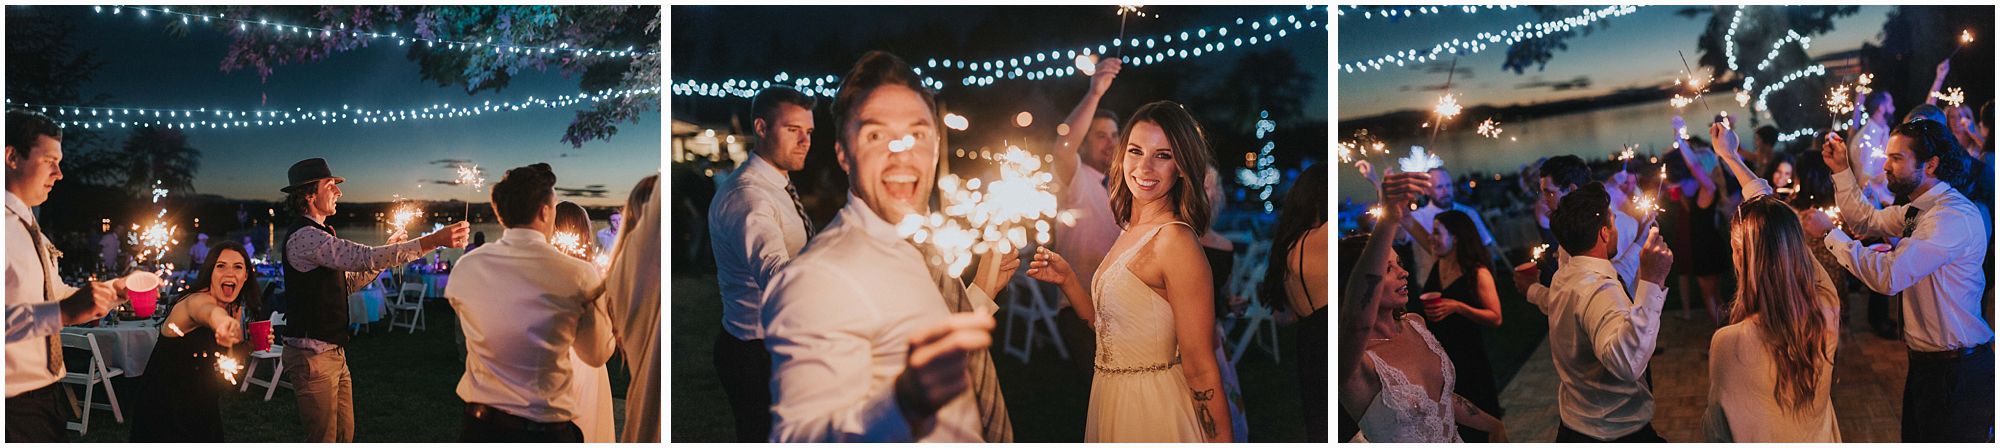 sparklers at wedding dance party 